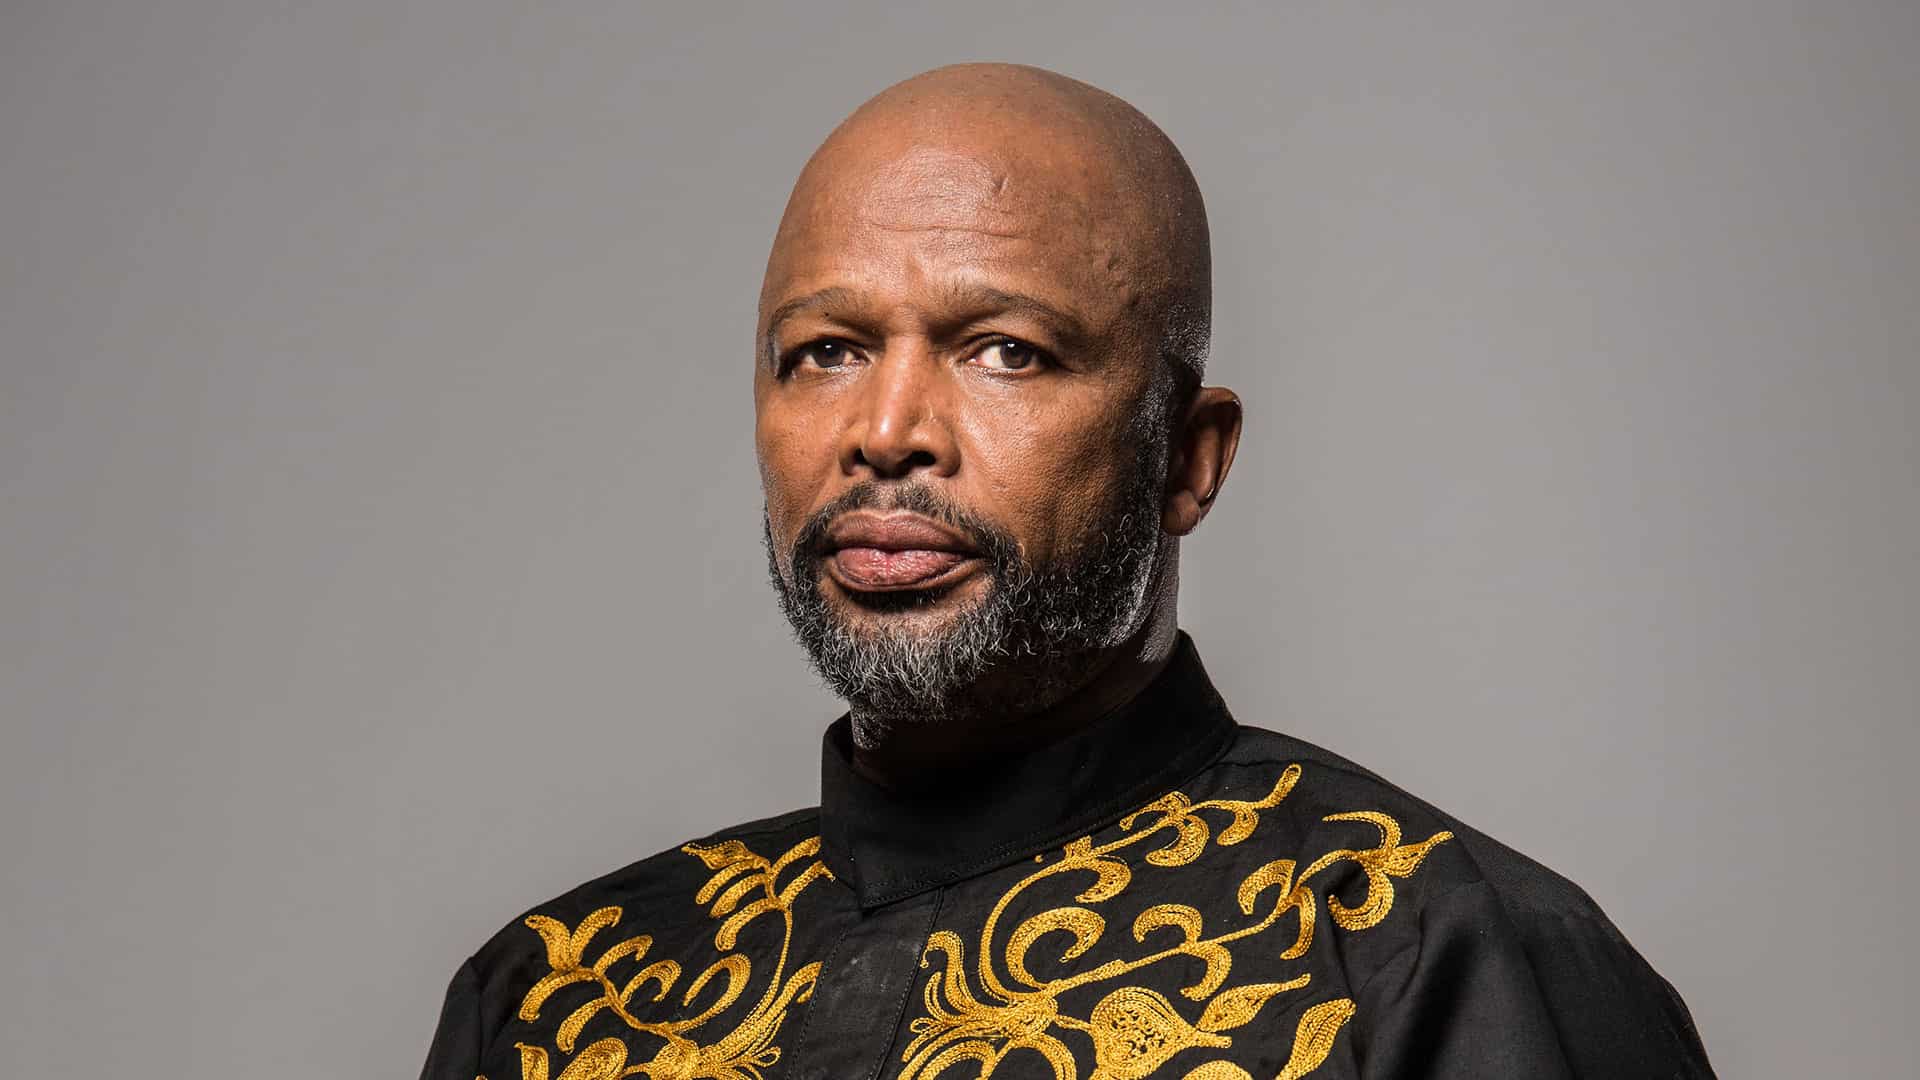 Sello Maake KaNcube Biography: Age, Net Worth, Wife, House, Salary, Cars, Movies & Contact Details